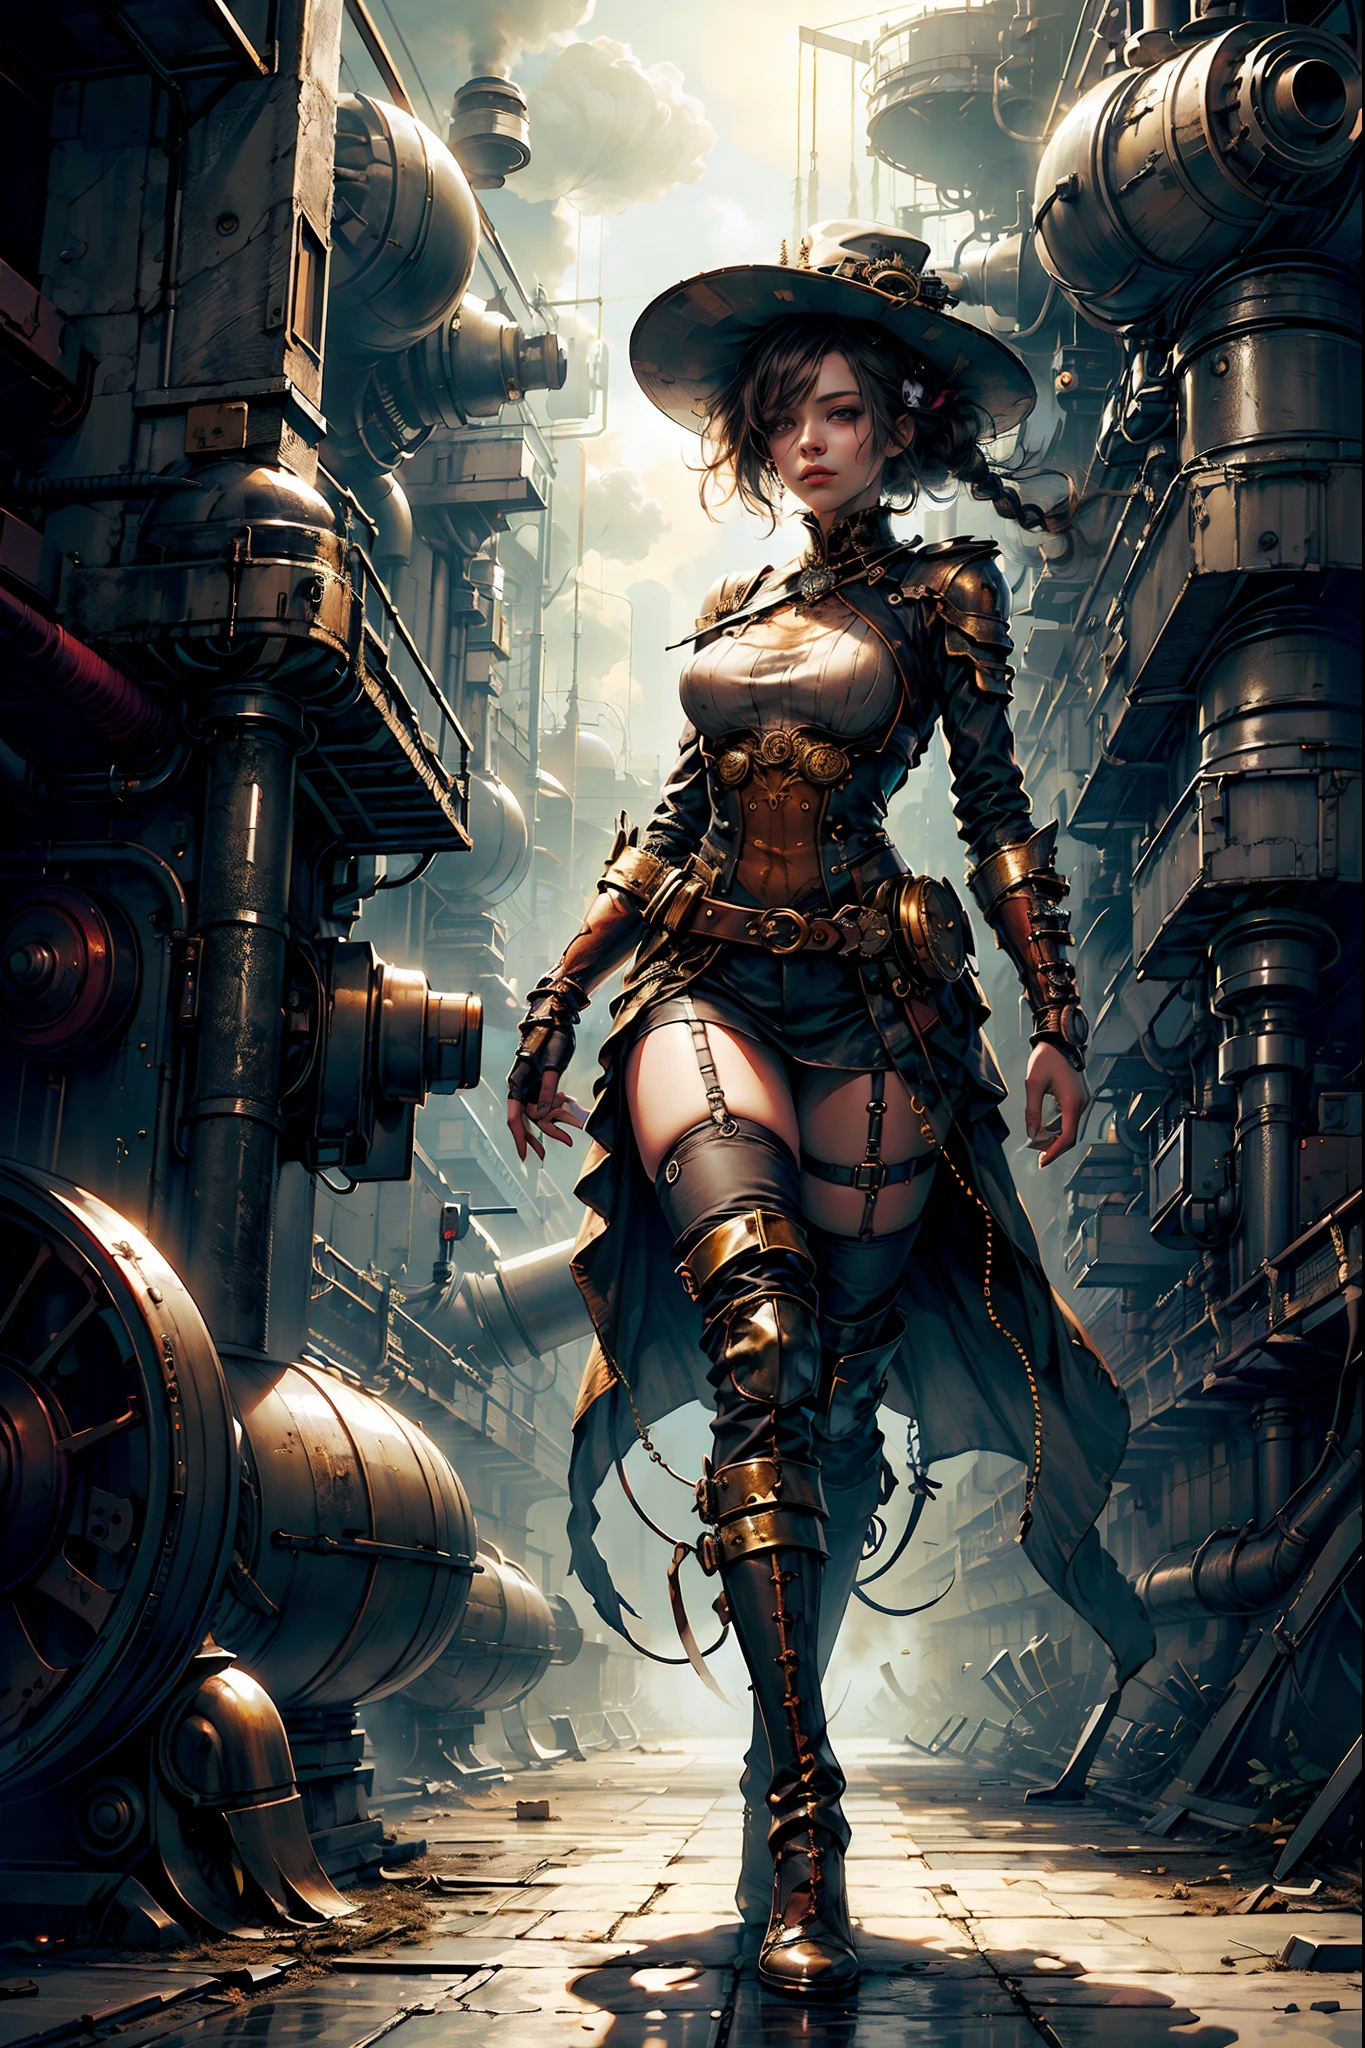 Ultra Resolution, Ultra detail, 8k , HDR, Ultra sharp,((top-quality)), ((​masterpiece)), ((realisitic)), (detailed), Reflective,there is a woman in a steam punk outfit posing for a picture,Full Body, steampunk fantasy style, steampunk girl, steampunk inventor girl, sci-fi steampunk, dieselpunk art style, steampunk pin-up girl, digital steampunk art, steam punk style, steam-punk, young girl in steampunk clothes, steampunk digital art, high quality steampunk art, steampunk